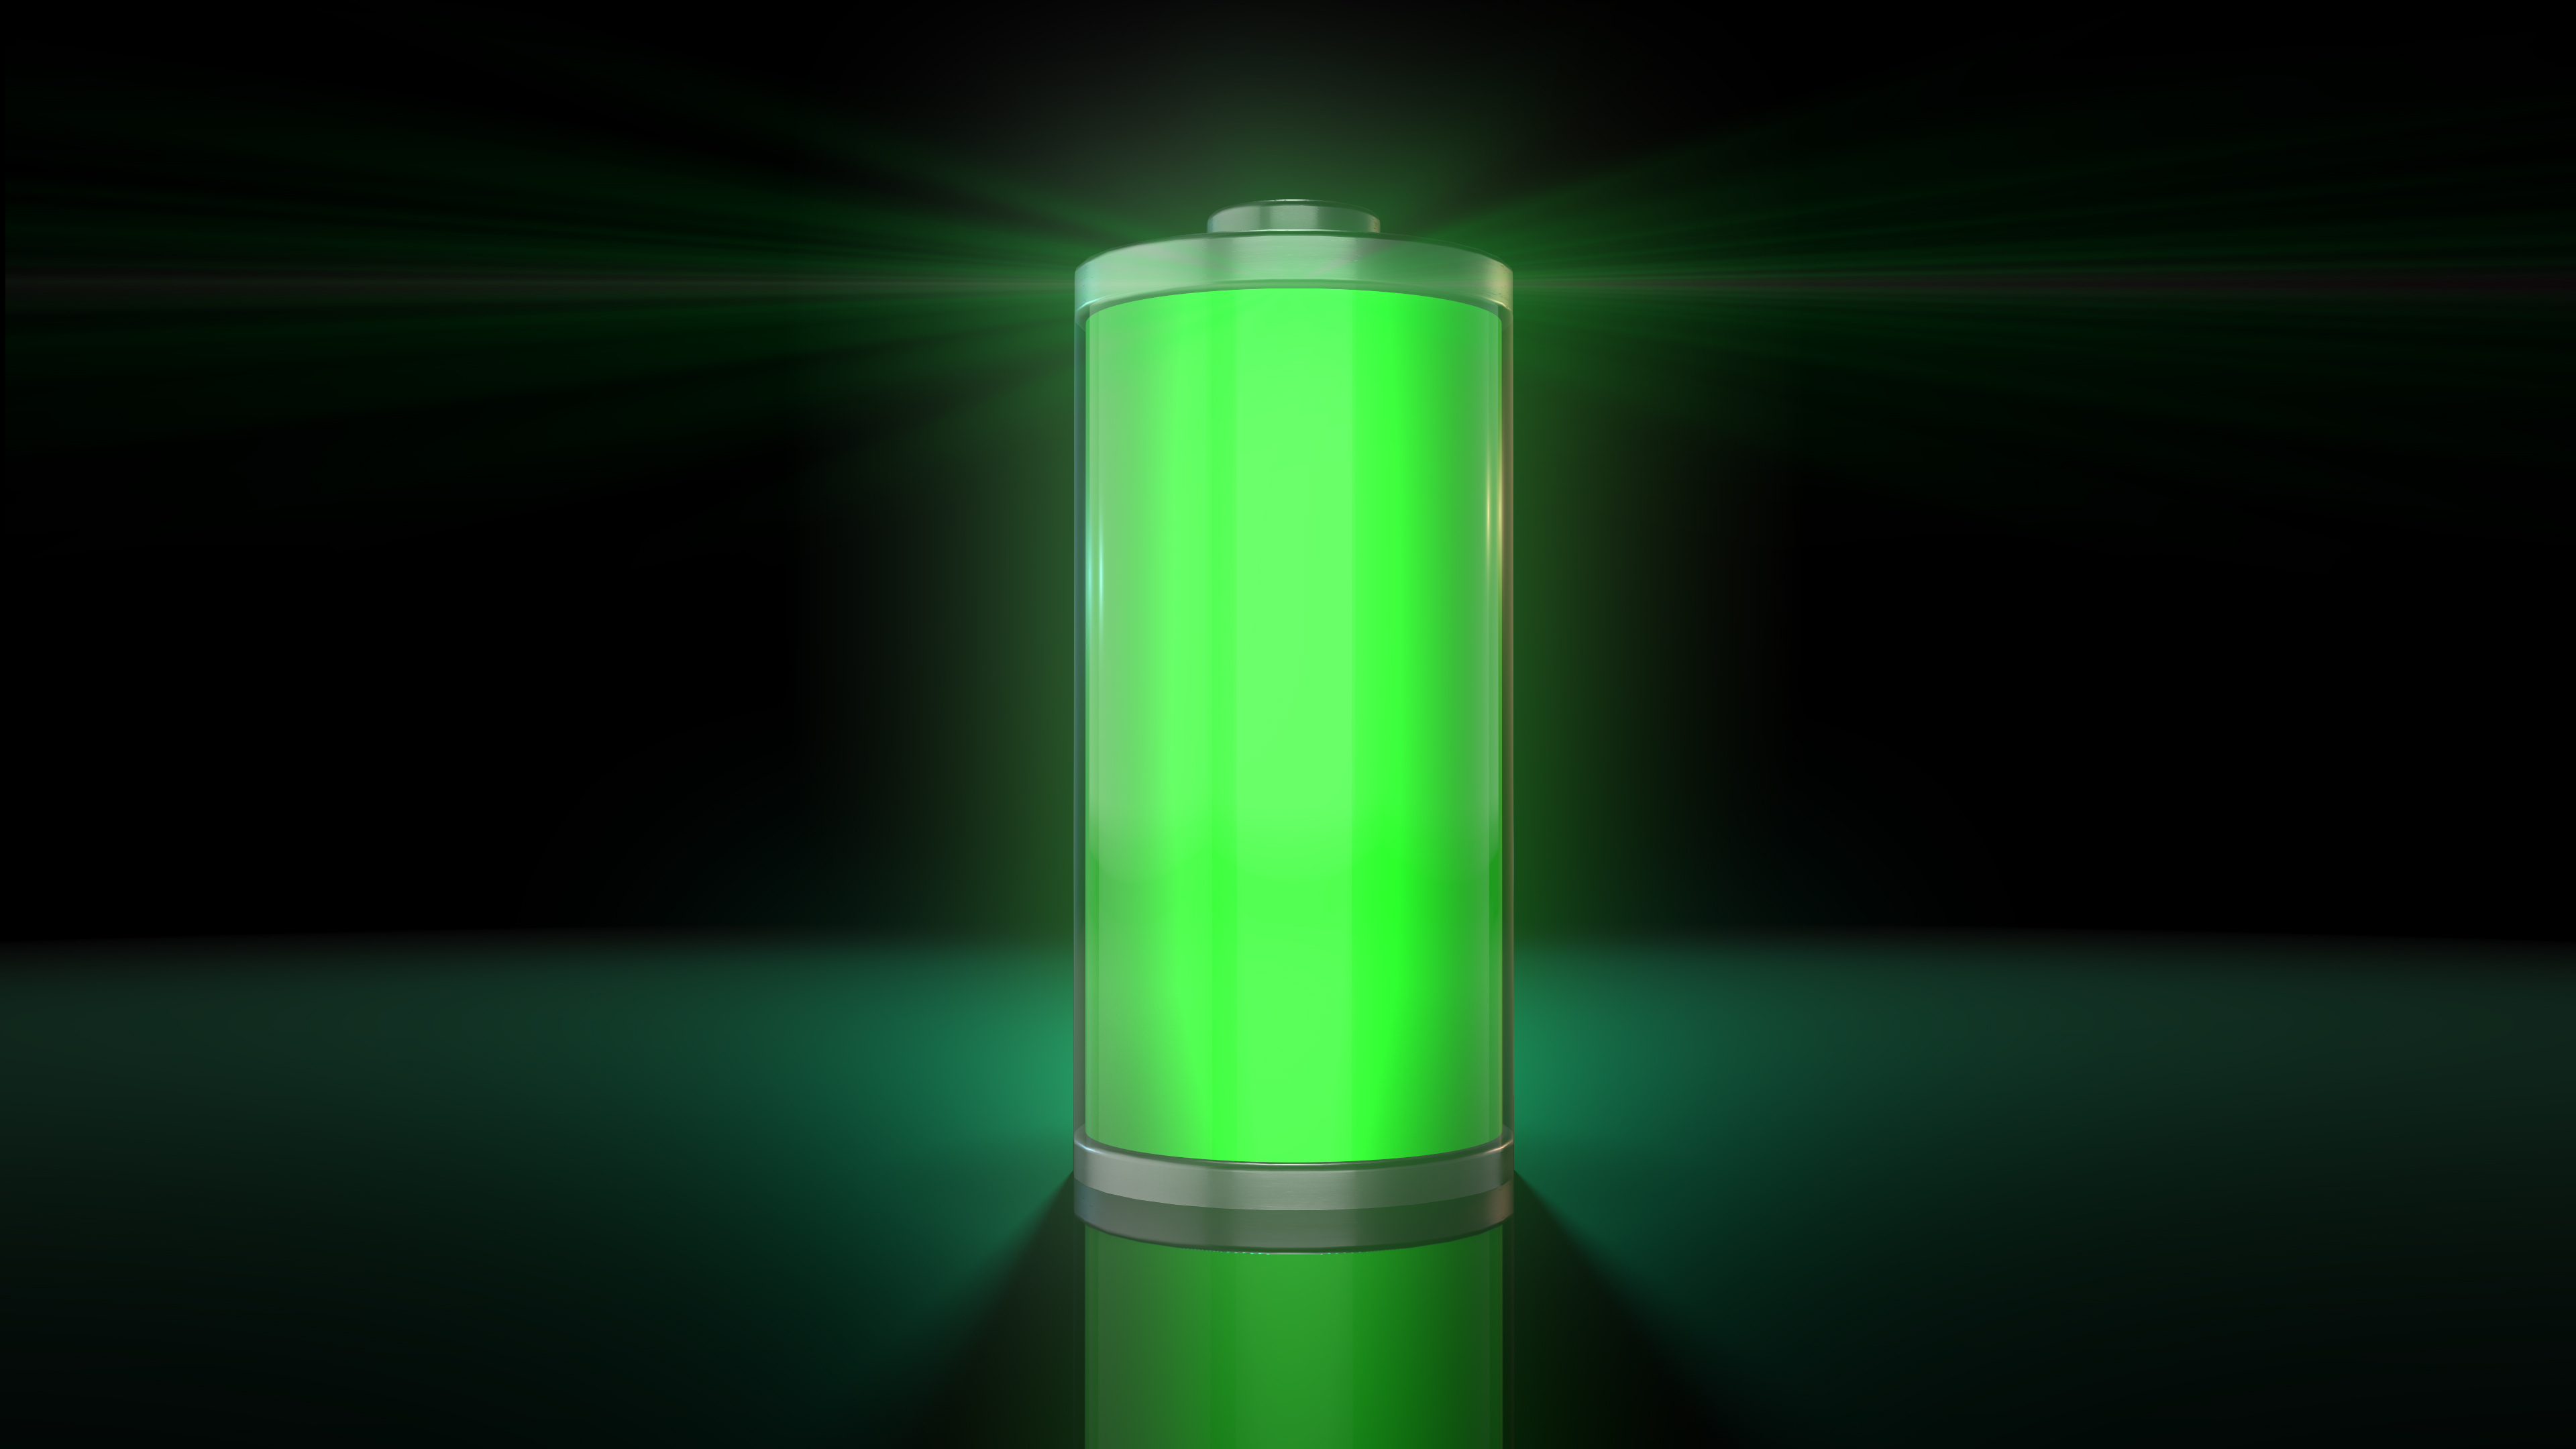 A glowing green battery